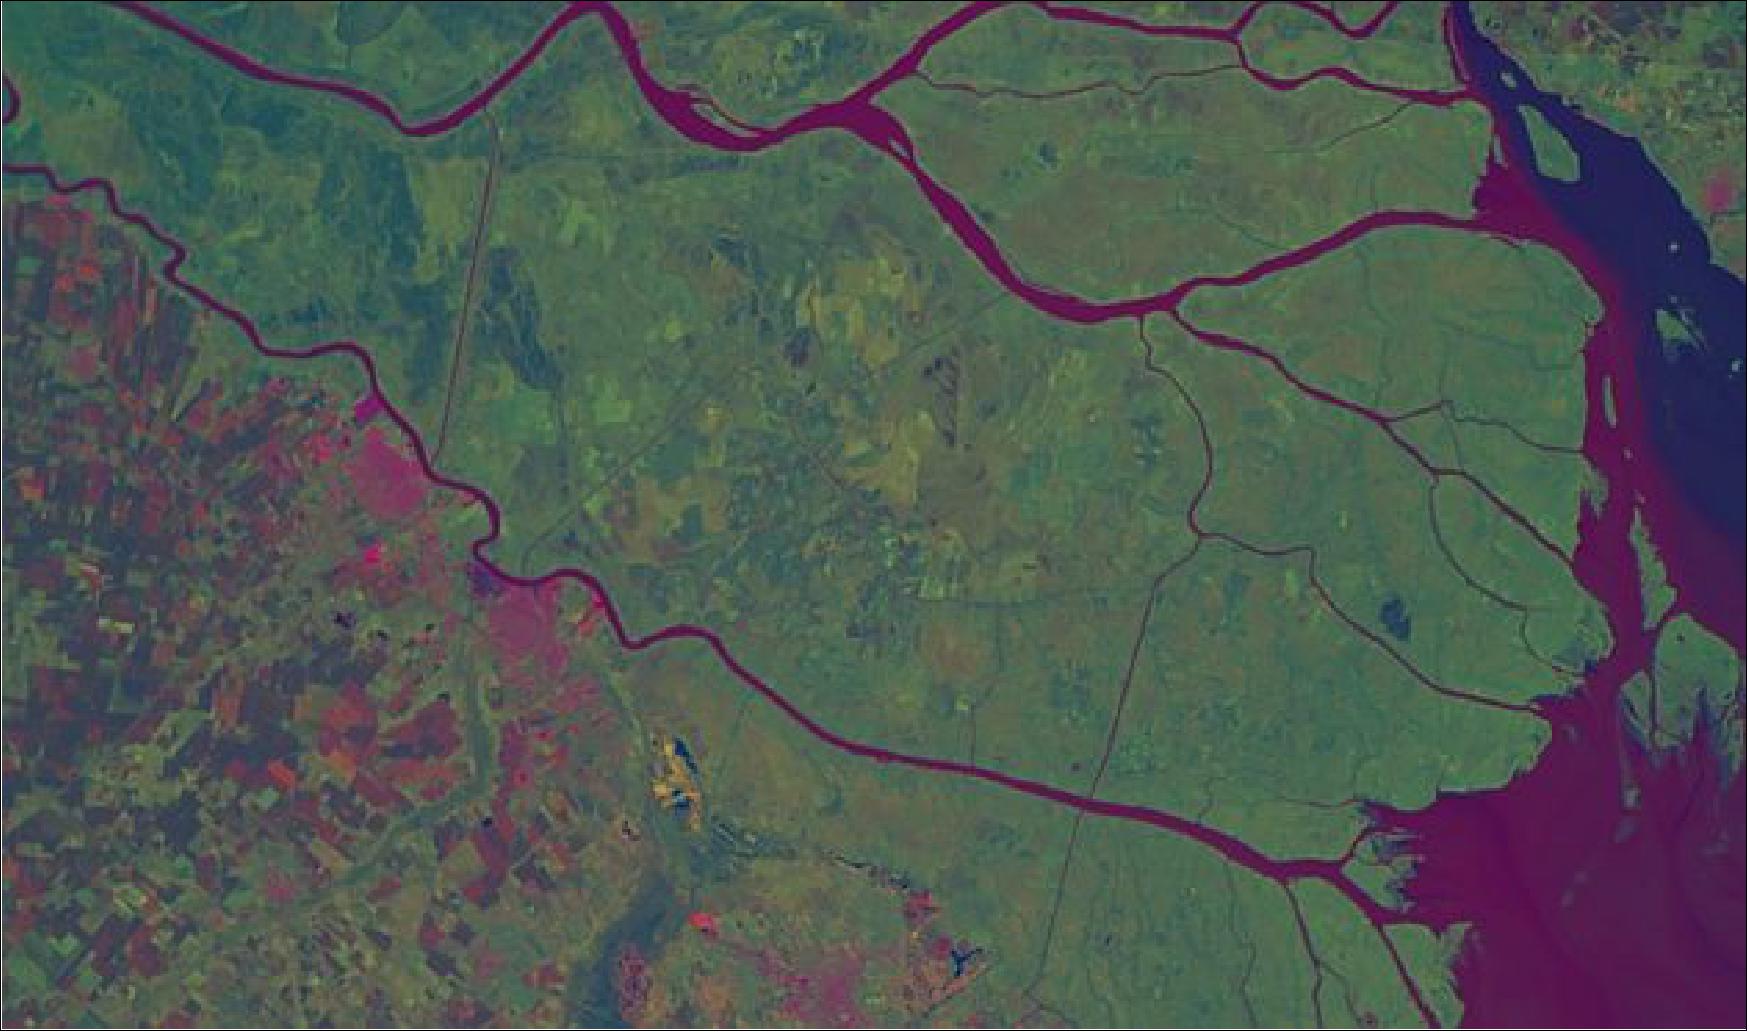 Figure 17: The commercial remote-sensing firm Satellogic captured this hyperspectral view of the countryside surrounding Buenos Aires (image credit: Satellogic)